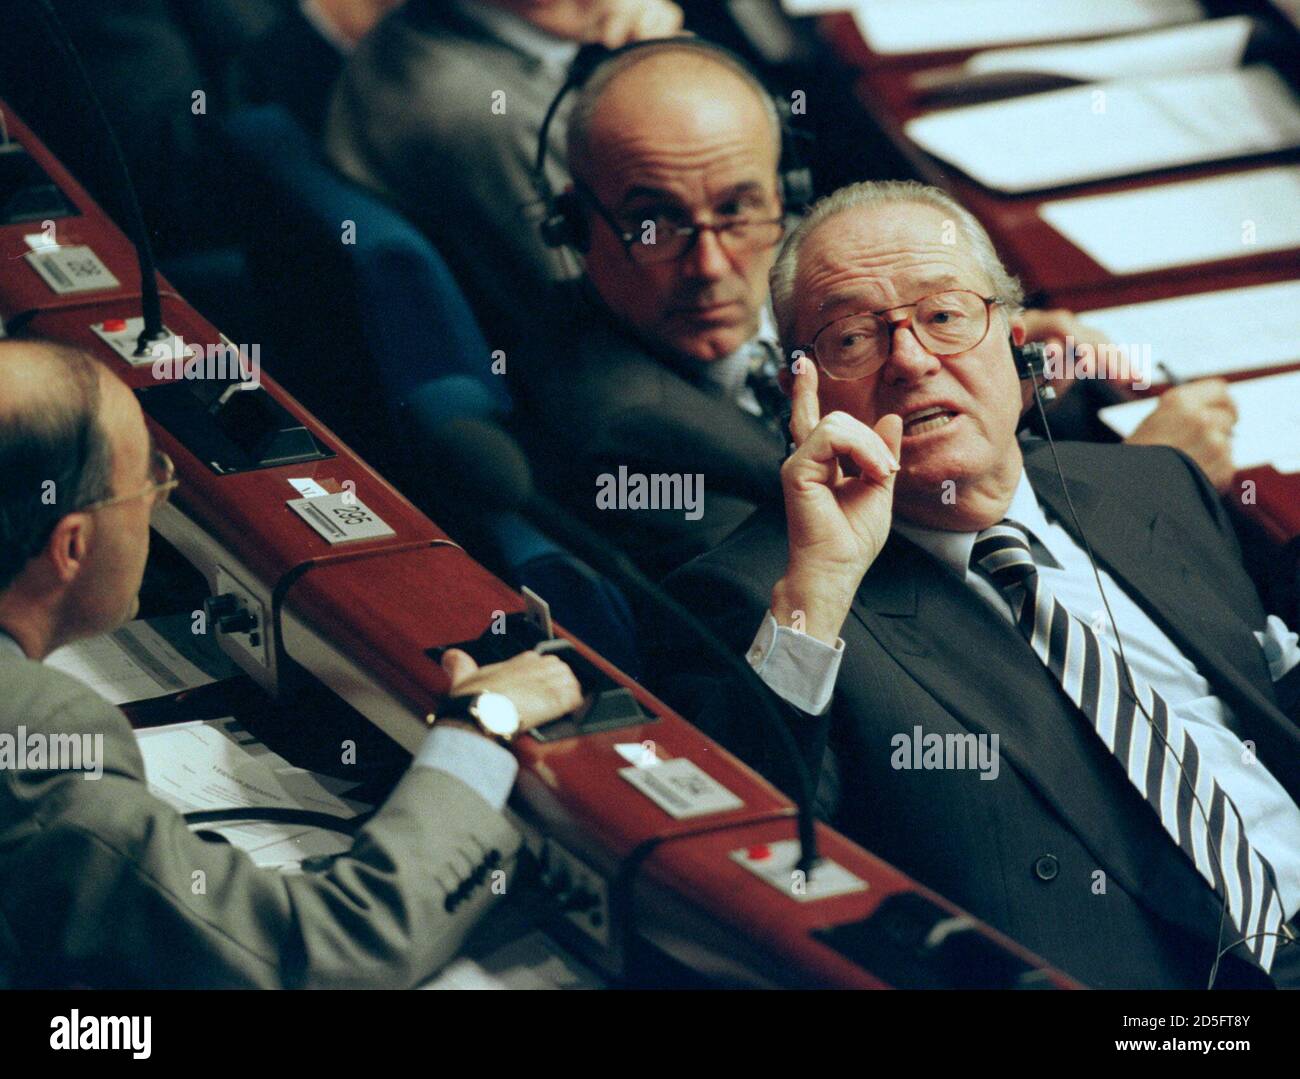 French National Front Party leader Jean-Marie Le Pen (R) turns to speak to  other members of his group at the European Parliament, Fernand Le Rachinel  (C) and Jean-Yves Le Gallou (L) November